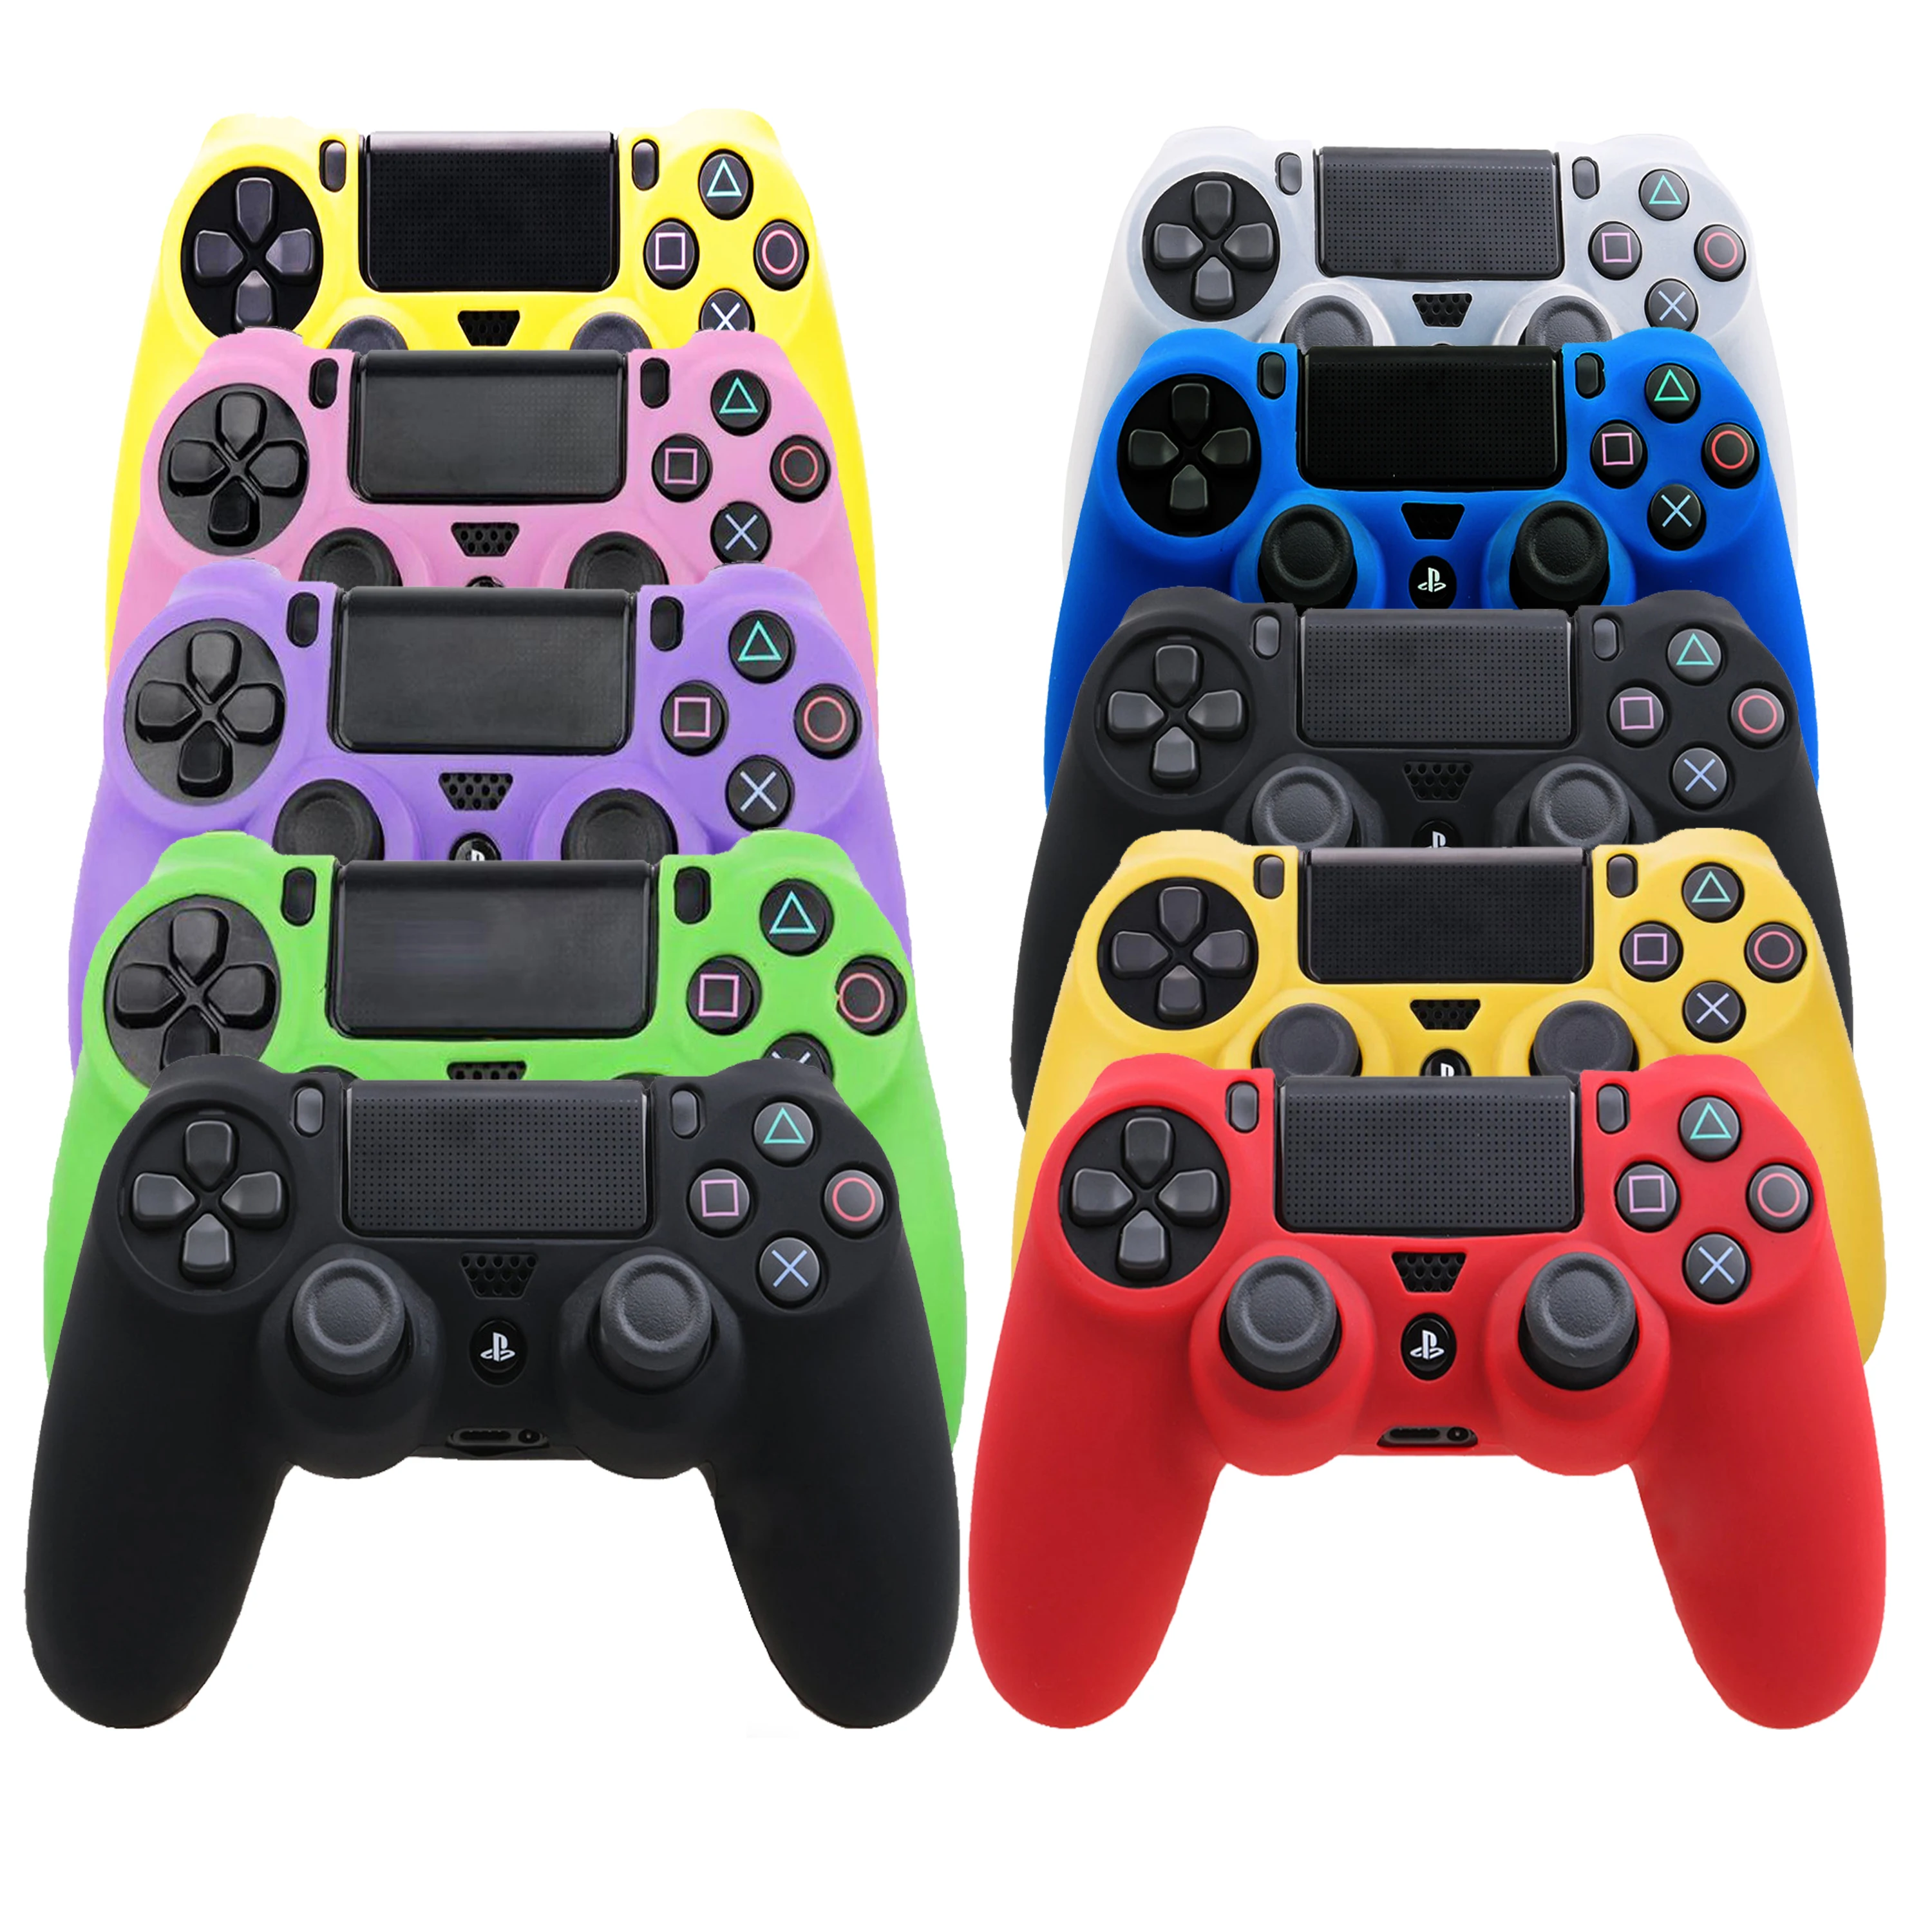 Multi Color Soft Silicone Rubber Gel Skin Non Slip Protective Case Cover For Sony Ps4 Controller Buy Ps4 Case Ps4 Skin Ps4 Cover Product On Alibaba Com